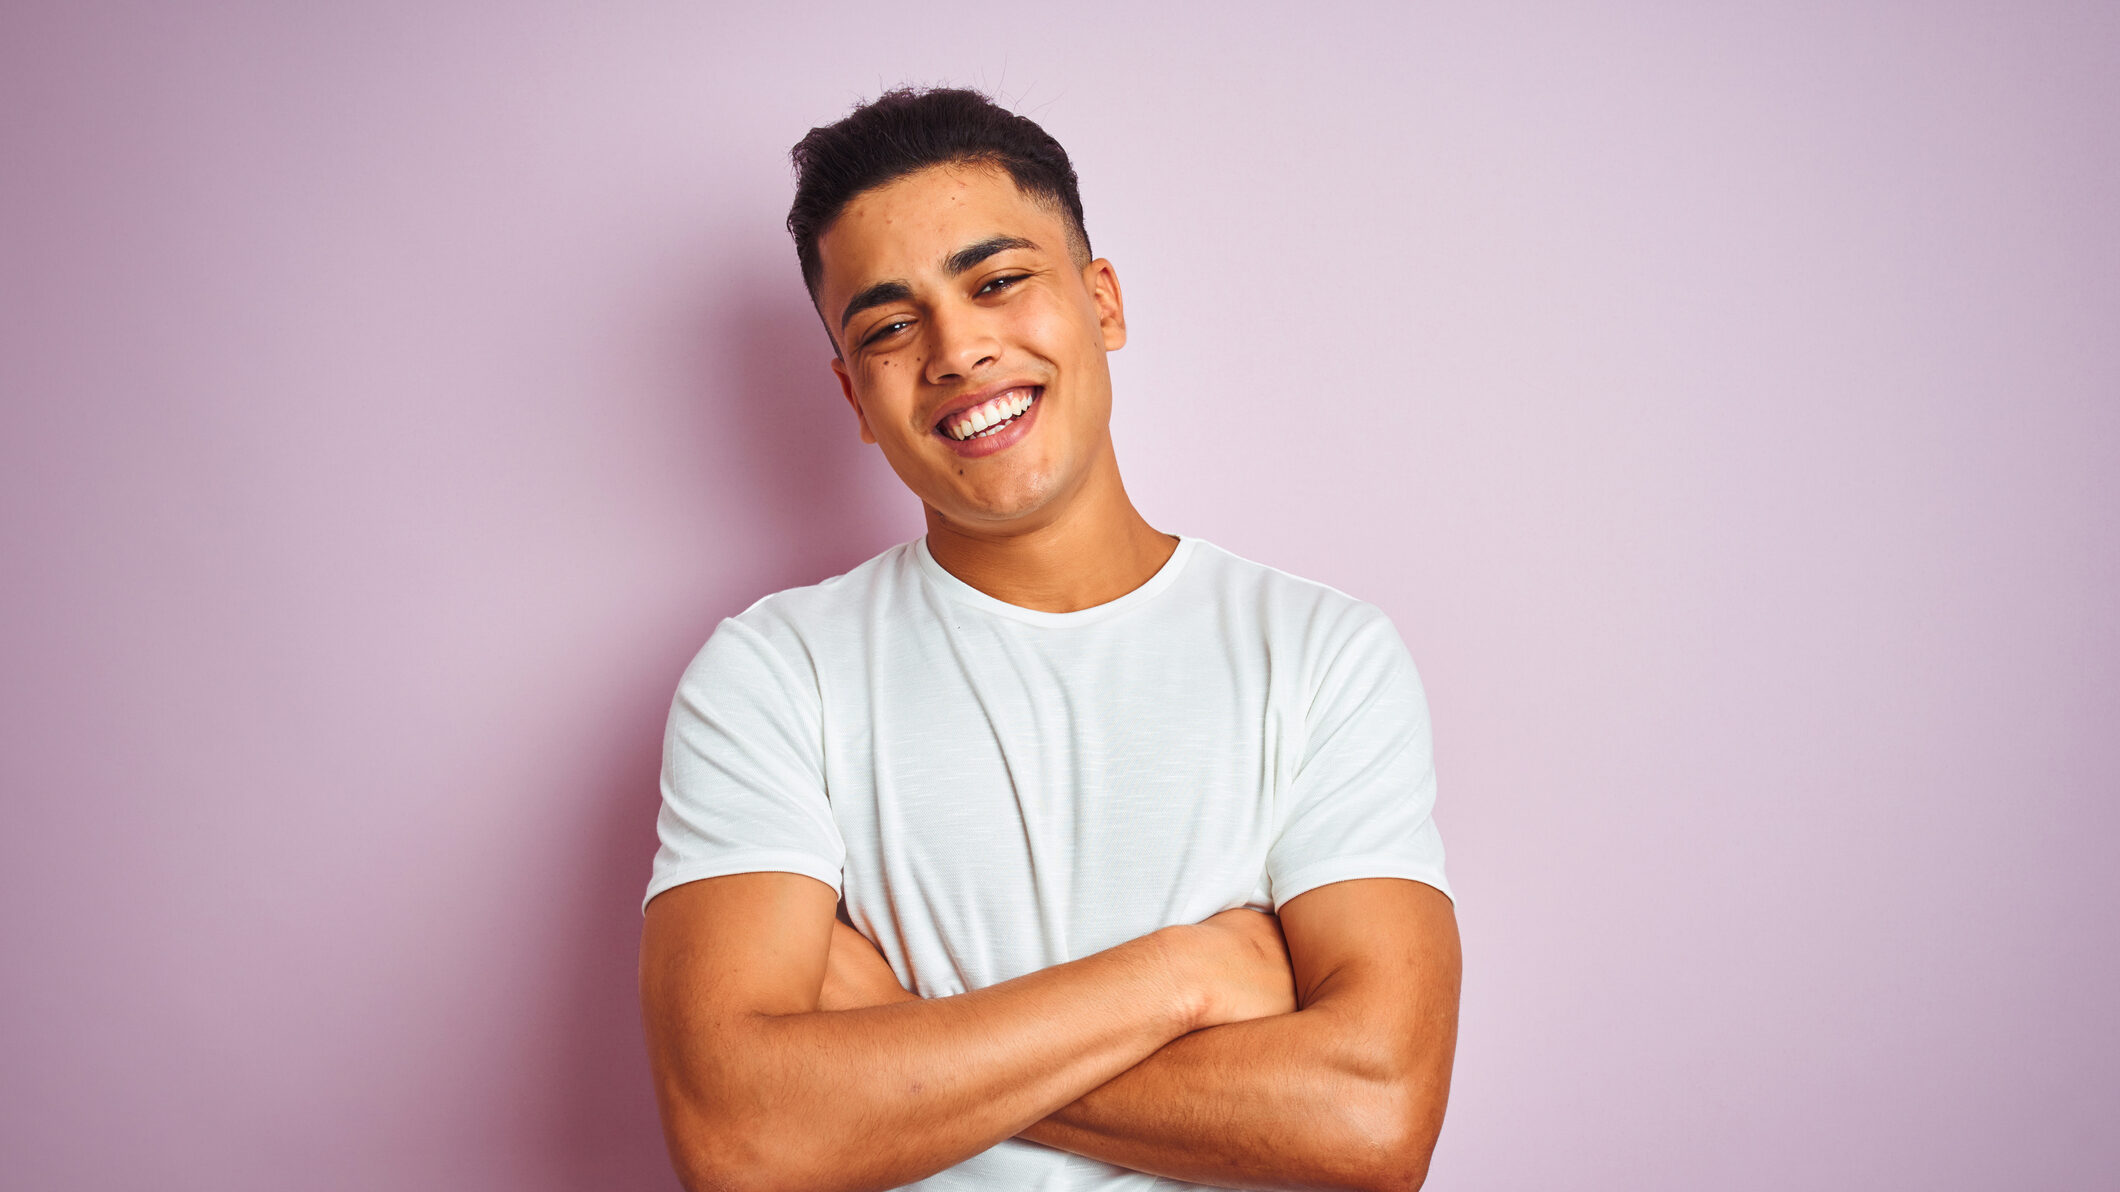 Asian man smiling at camera in a white t-shirt, arms crossed, pink background"